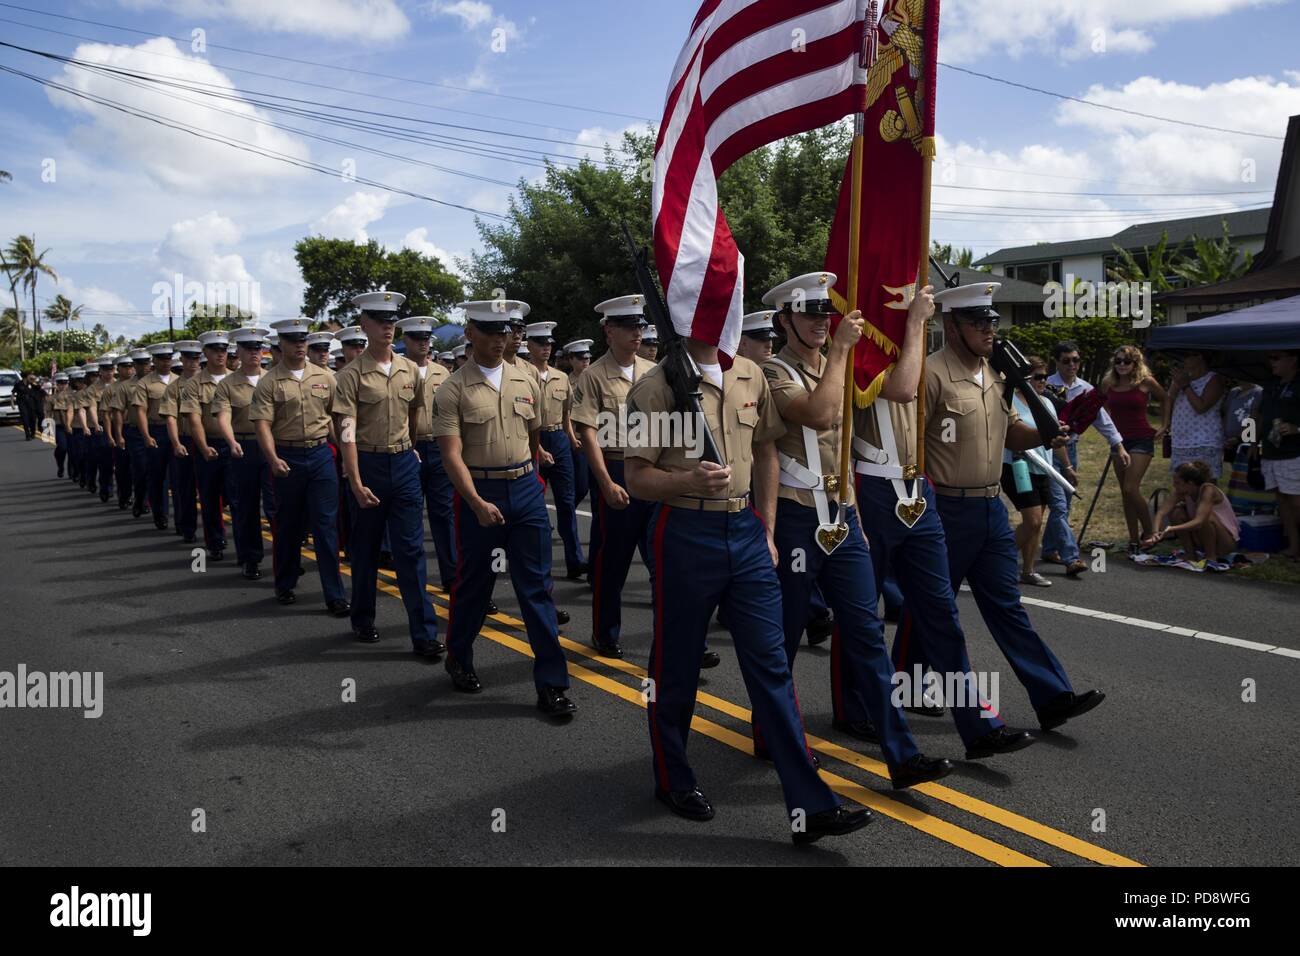 U.S. Marines with Marine Corps Base Hawaii, march in the Kailua Independence Day Parade, Hawaii, Jul. 4, 2018, July 4, 2018. The Kailua area has held parade annually for 72 years, celebrating America's Independence and the local community. (U.S. Marine Corps Photo by Sgt. Alex Kouns). () Stock Photo